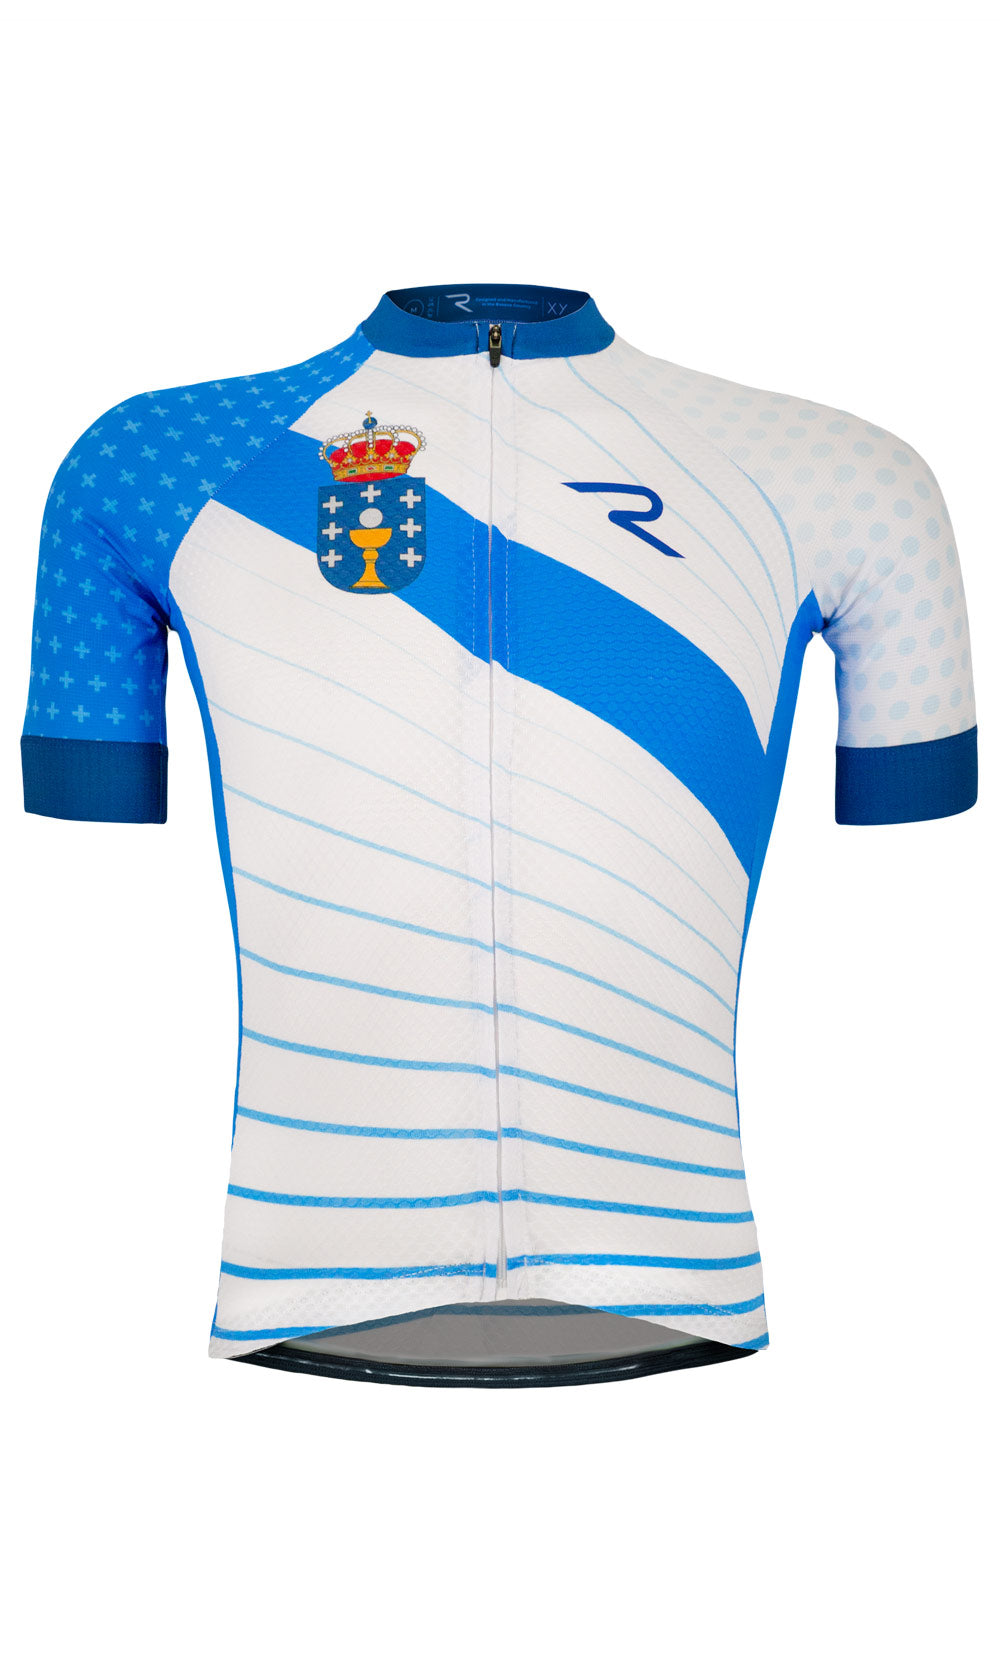 Maillot court GALICIA EDITION